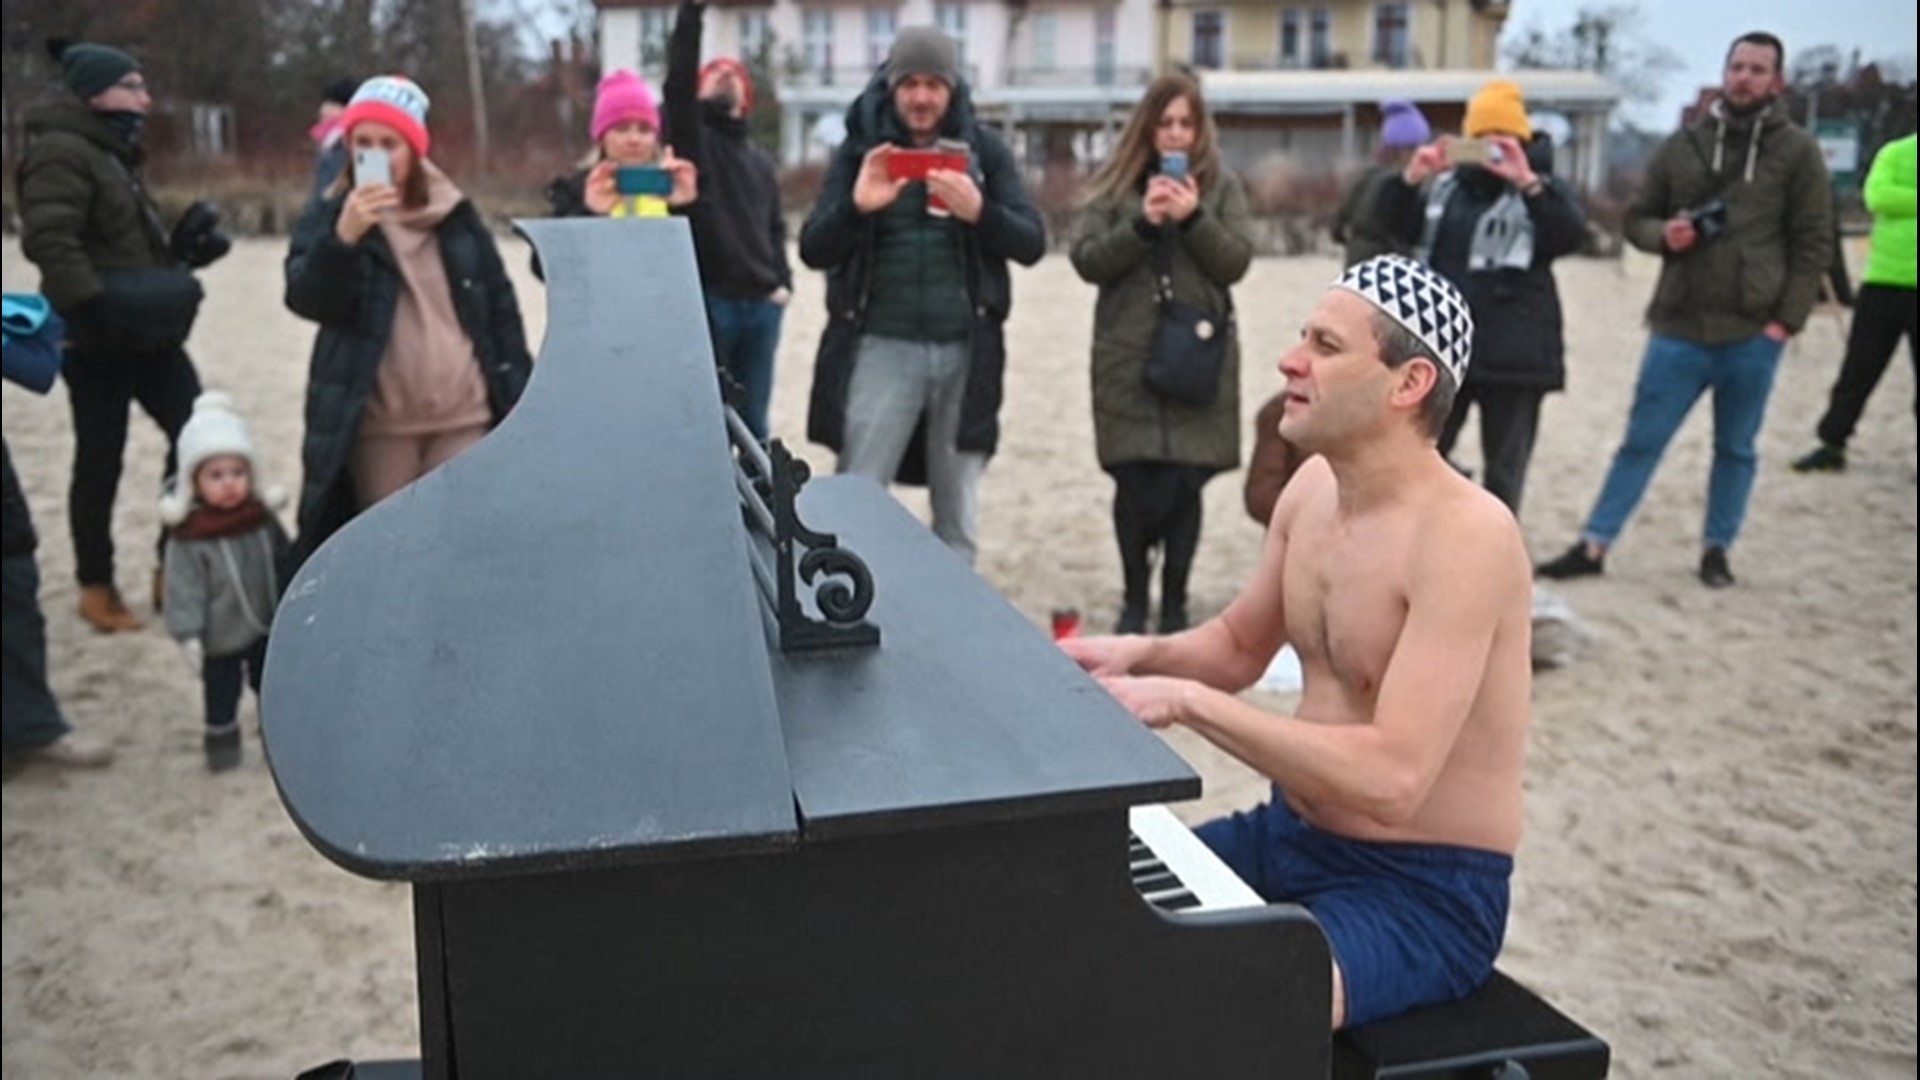 As swimmers leaped into a frigid Baltic Sea on Feb. 28, pianist Tomasz Szwielnik performed in just a bathing suit to raise money for a young man's medical costs.